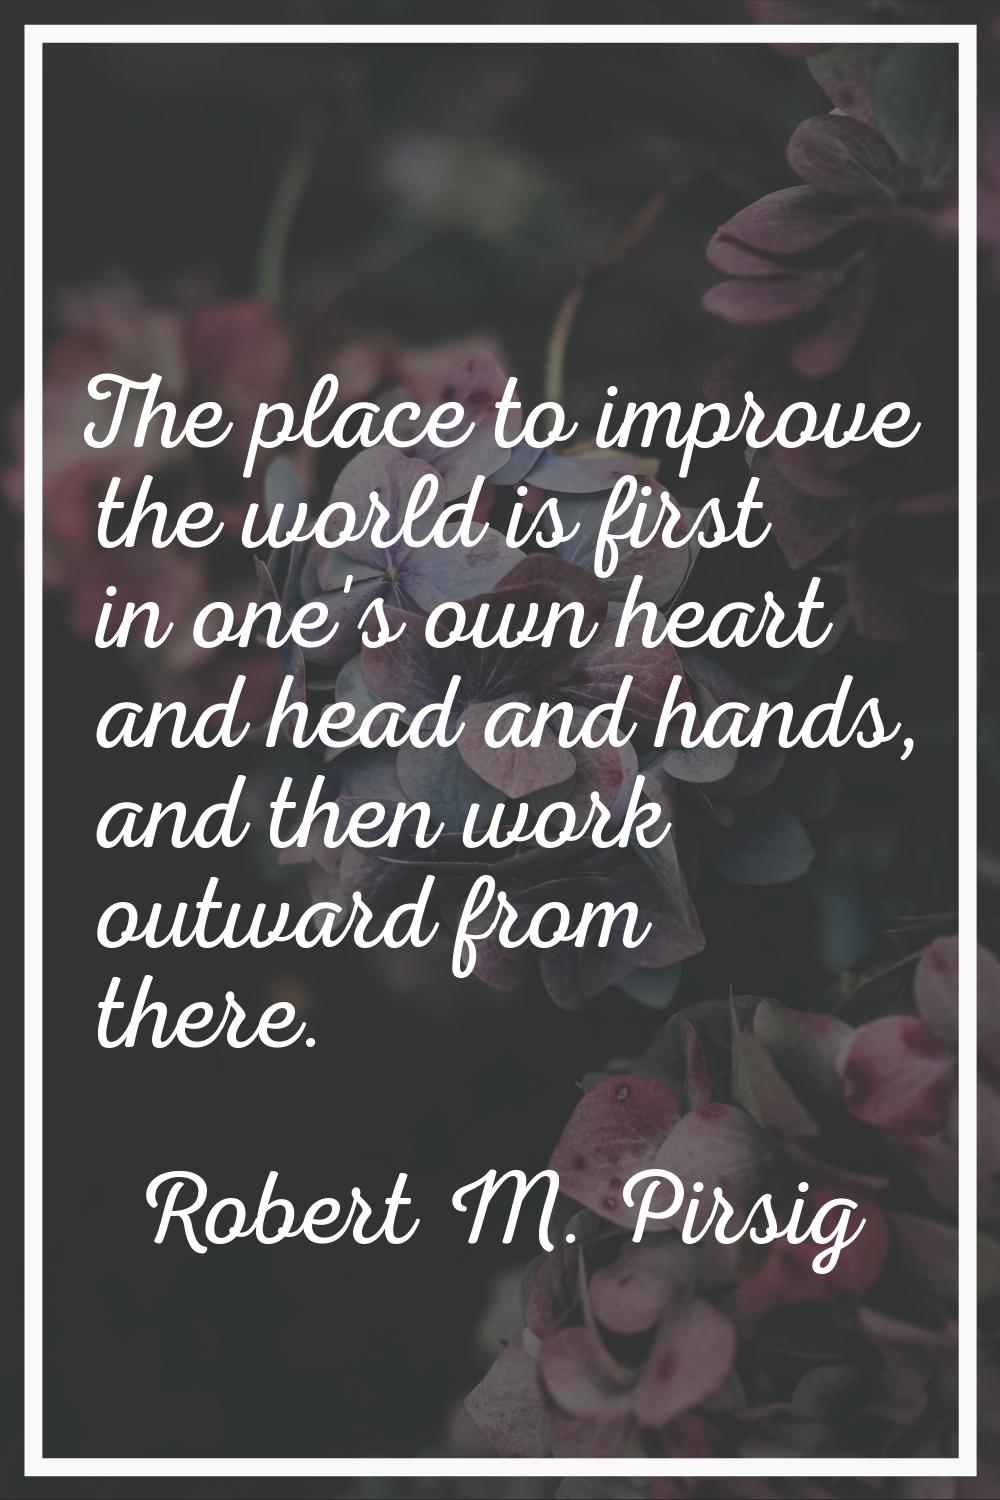 The place to improve the world is first in one's own heart and head and hands, and then work outwar